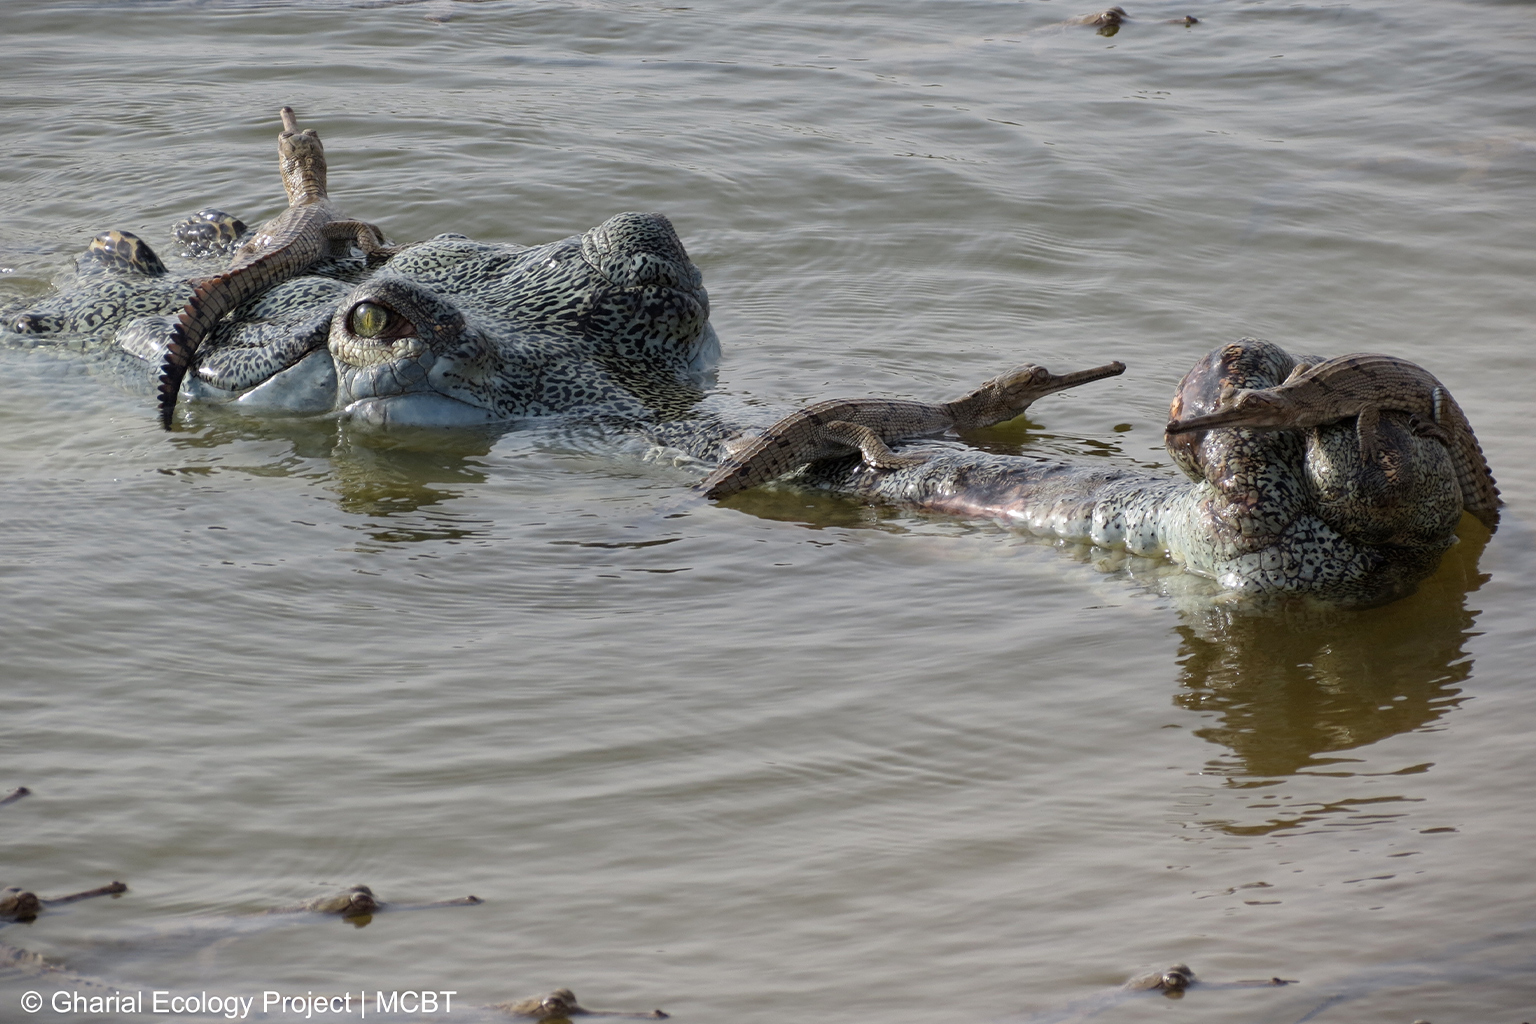 A male gharial guarding hatchlings. 